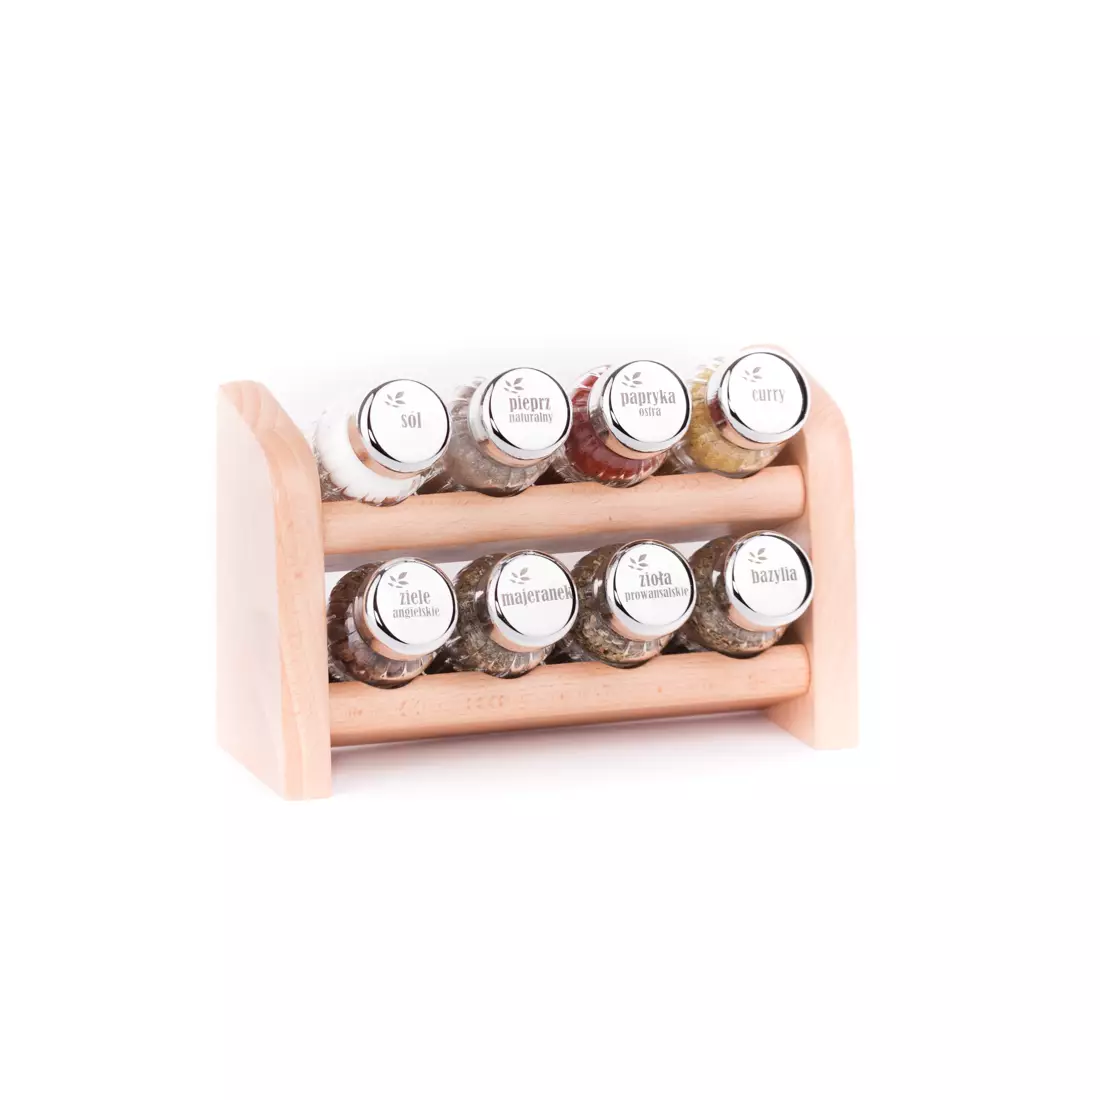 GALD 8NS spice rack, natural shine